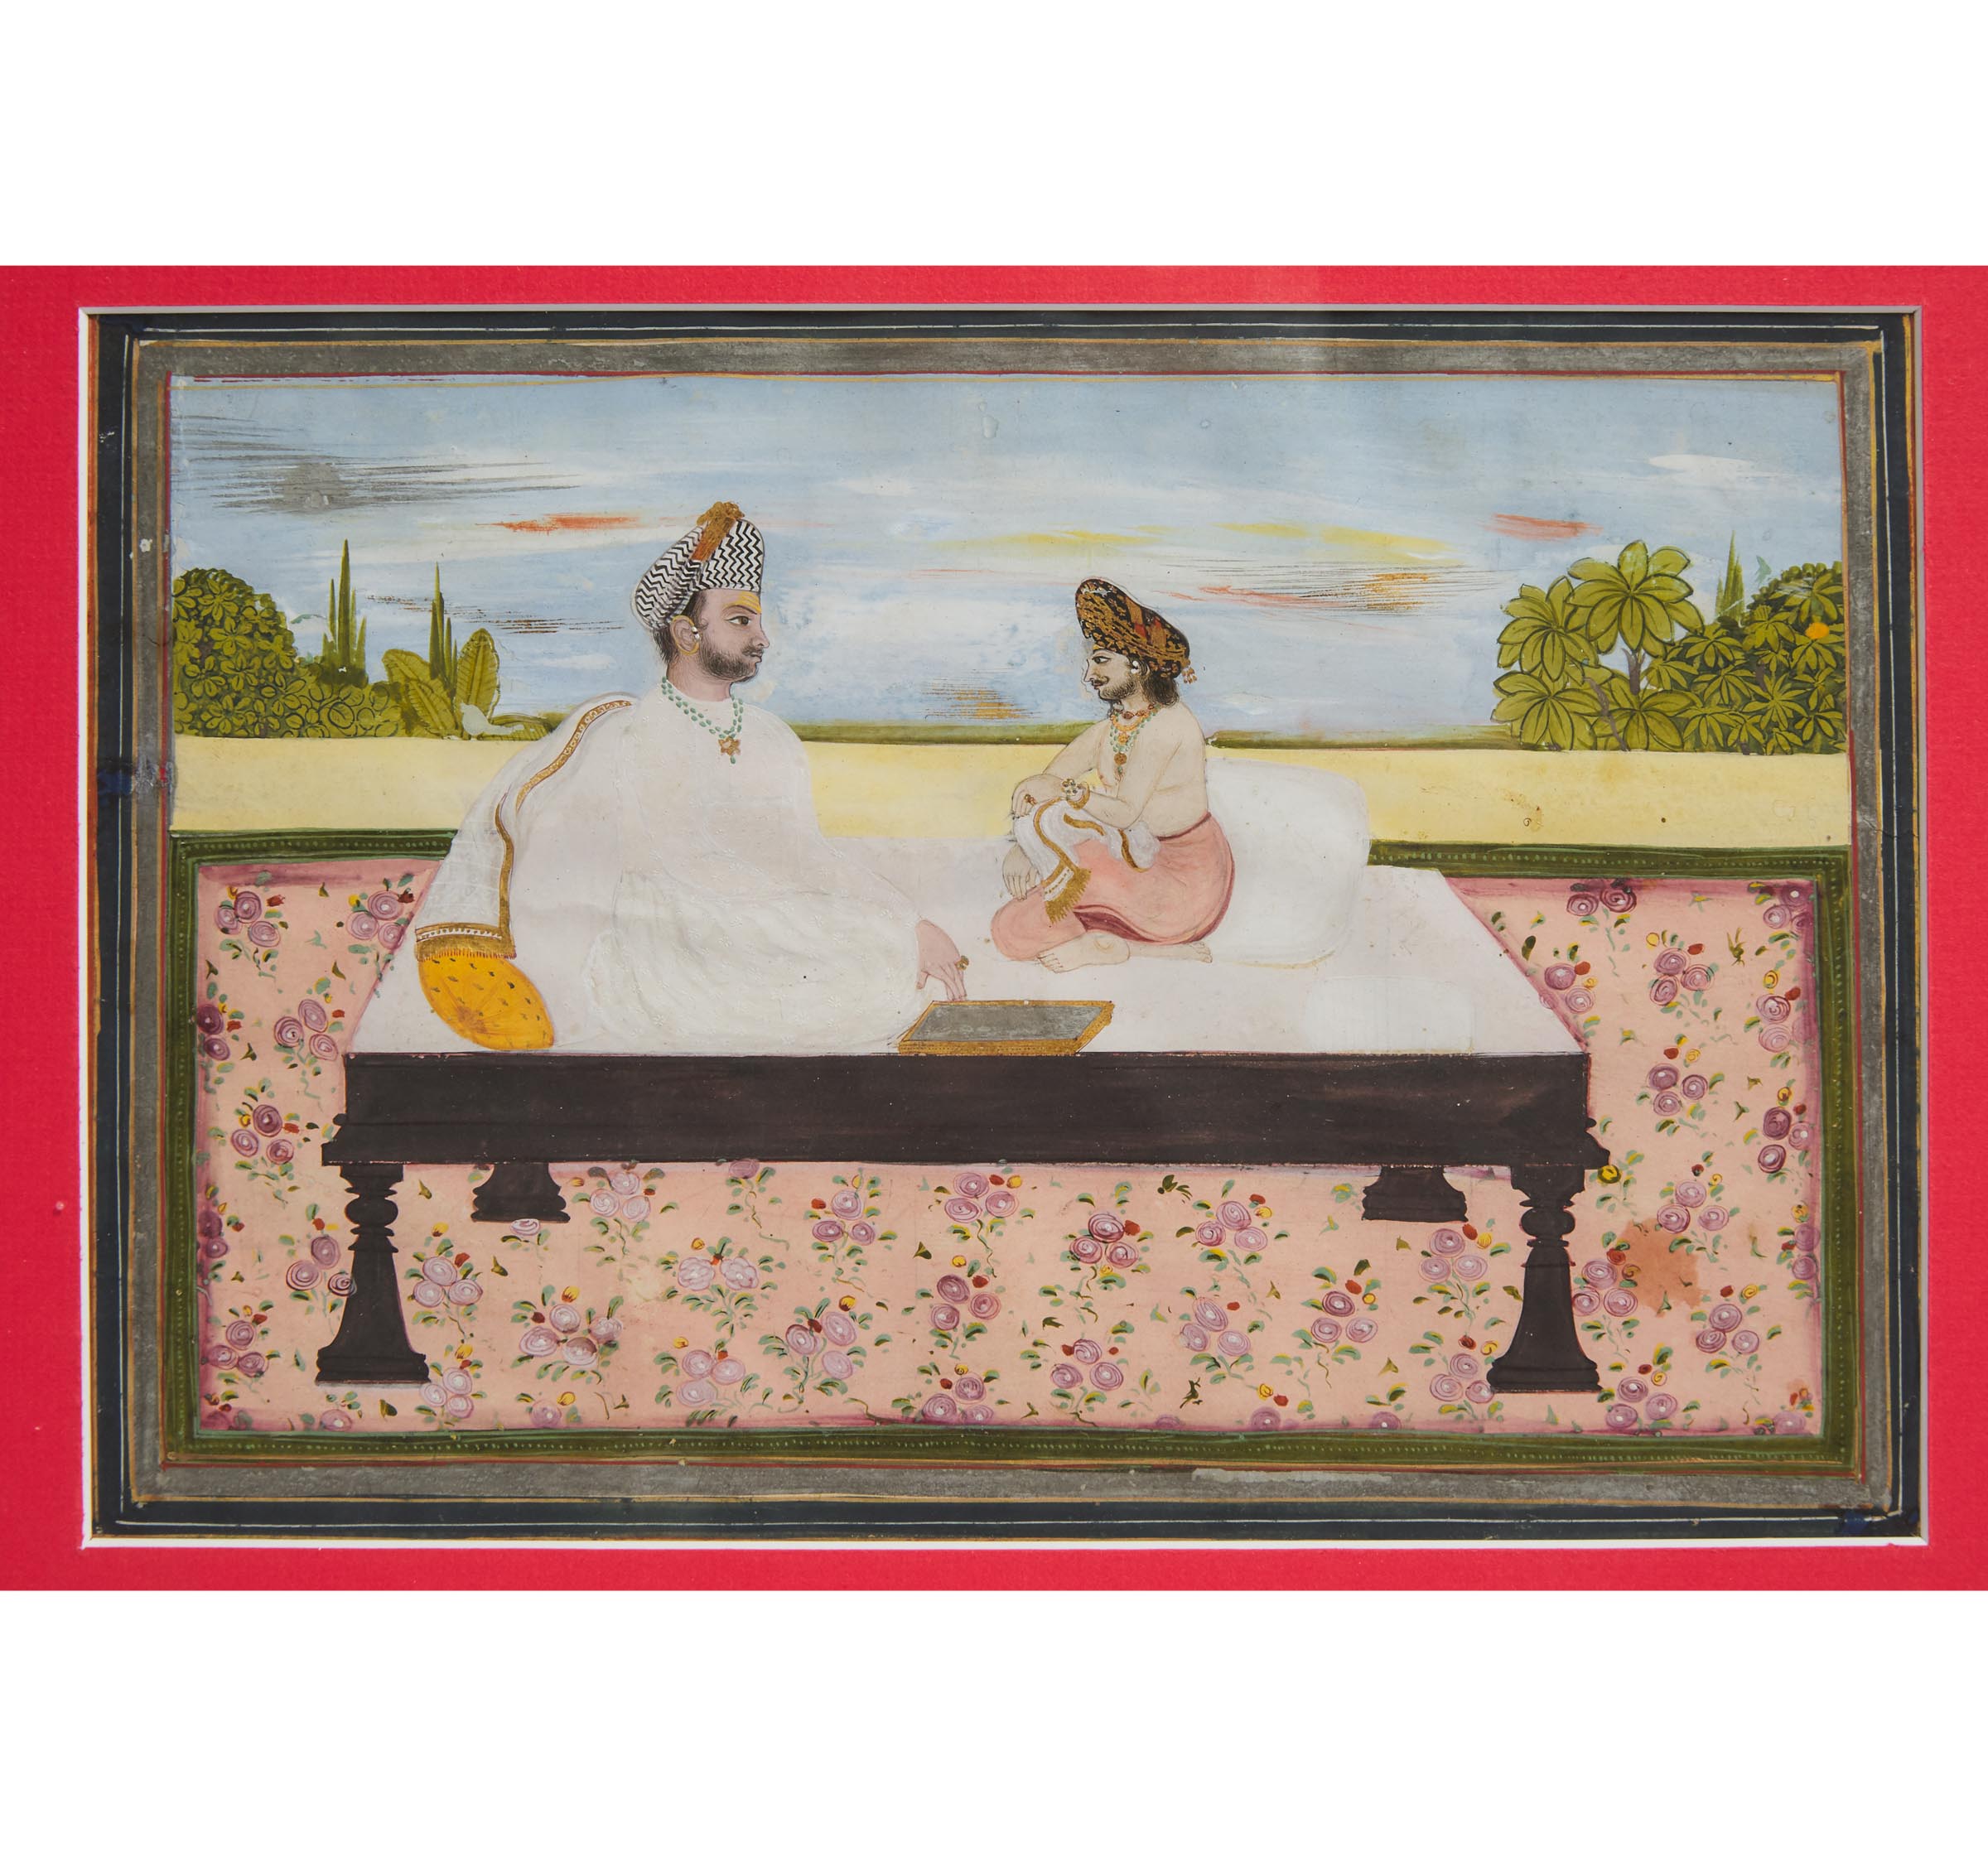 An Indian Miniature Painting of a Seated Nobleman with a Servant, 19th Century